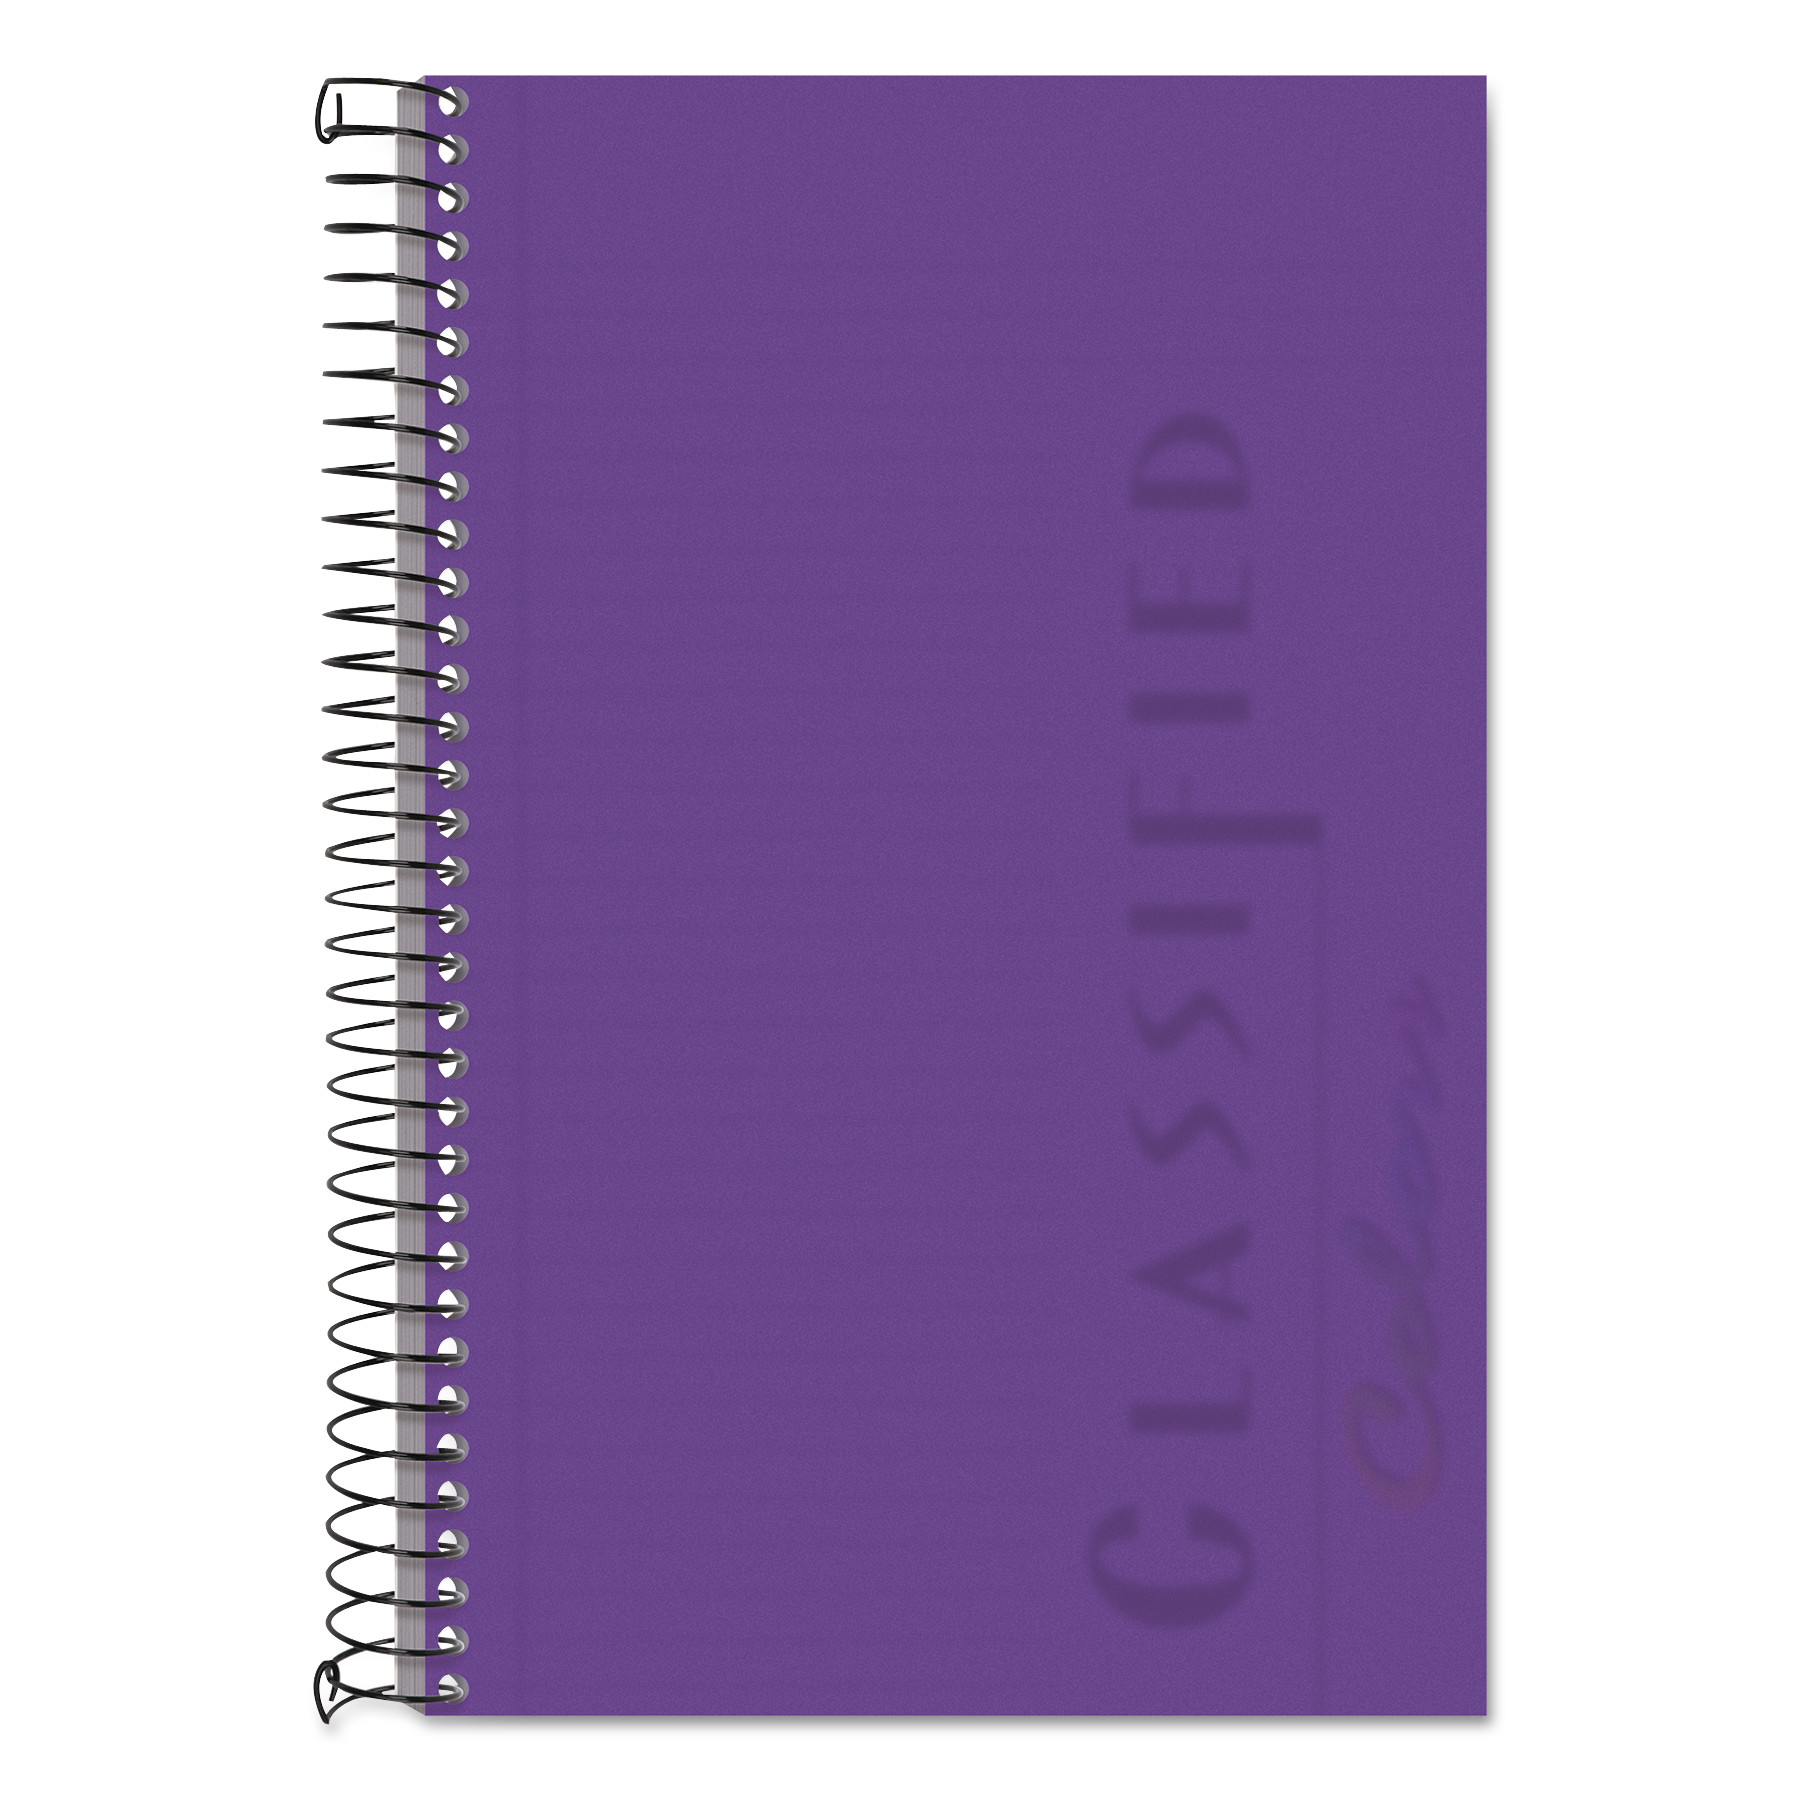  TOPS 99712 Color Notebooks, 1 Subject, Narrow Rule, Orchid Cover, 8.5 x 5.5, 100 Sheets (TOP99712) 